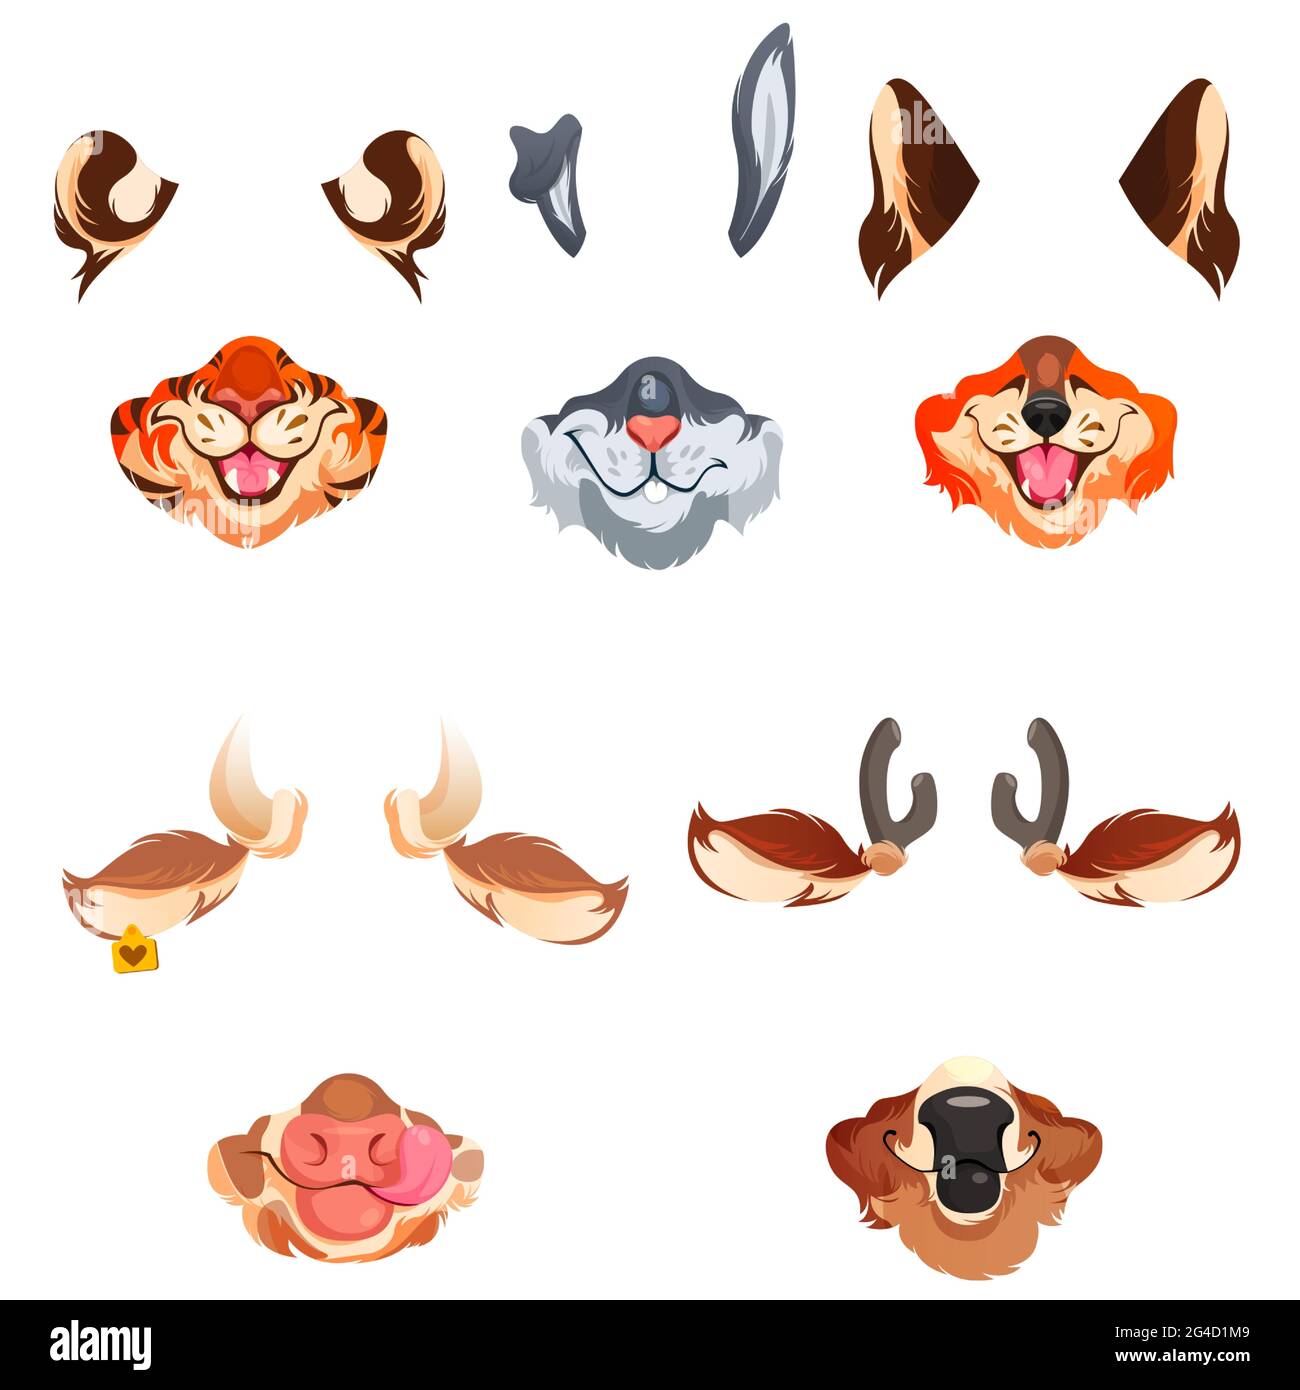 Animal face masks for social networks, selfie photo or video chat filter. Cute tiger, rabbit, fox and cow or deer muzzles, ears, noses and fur elements isolated on white background, cartoon vector set Stock Vector